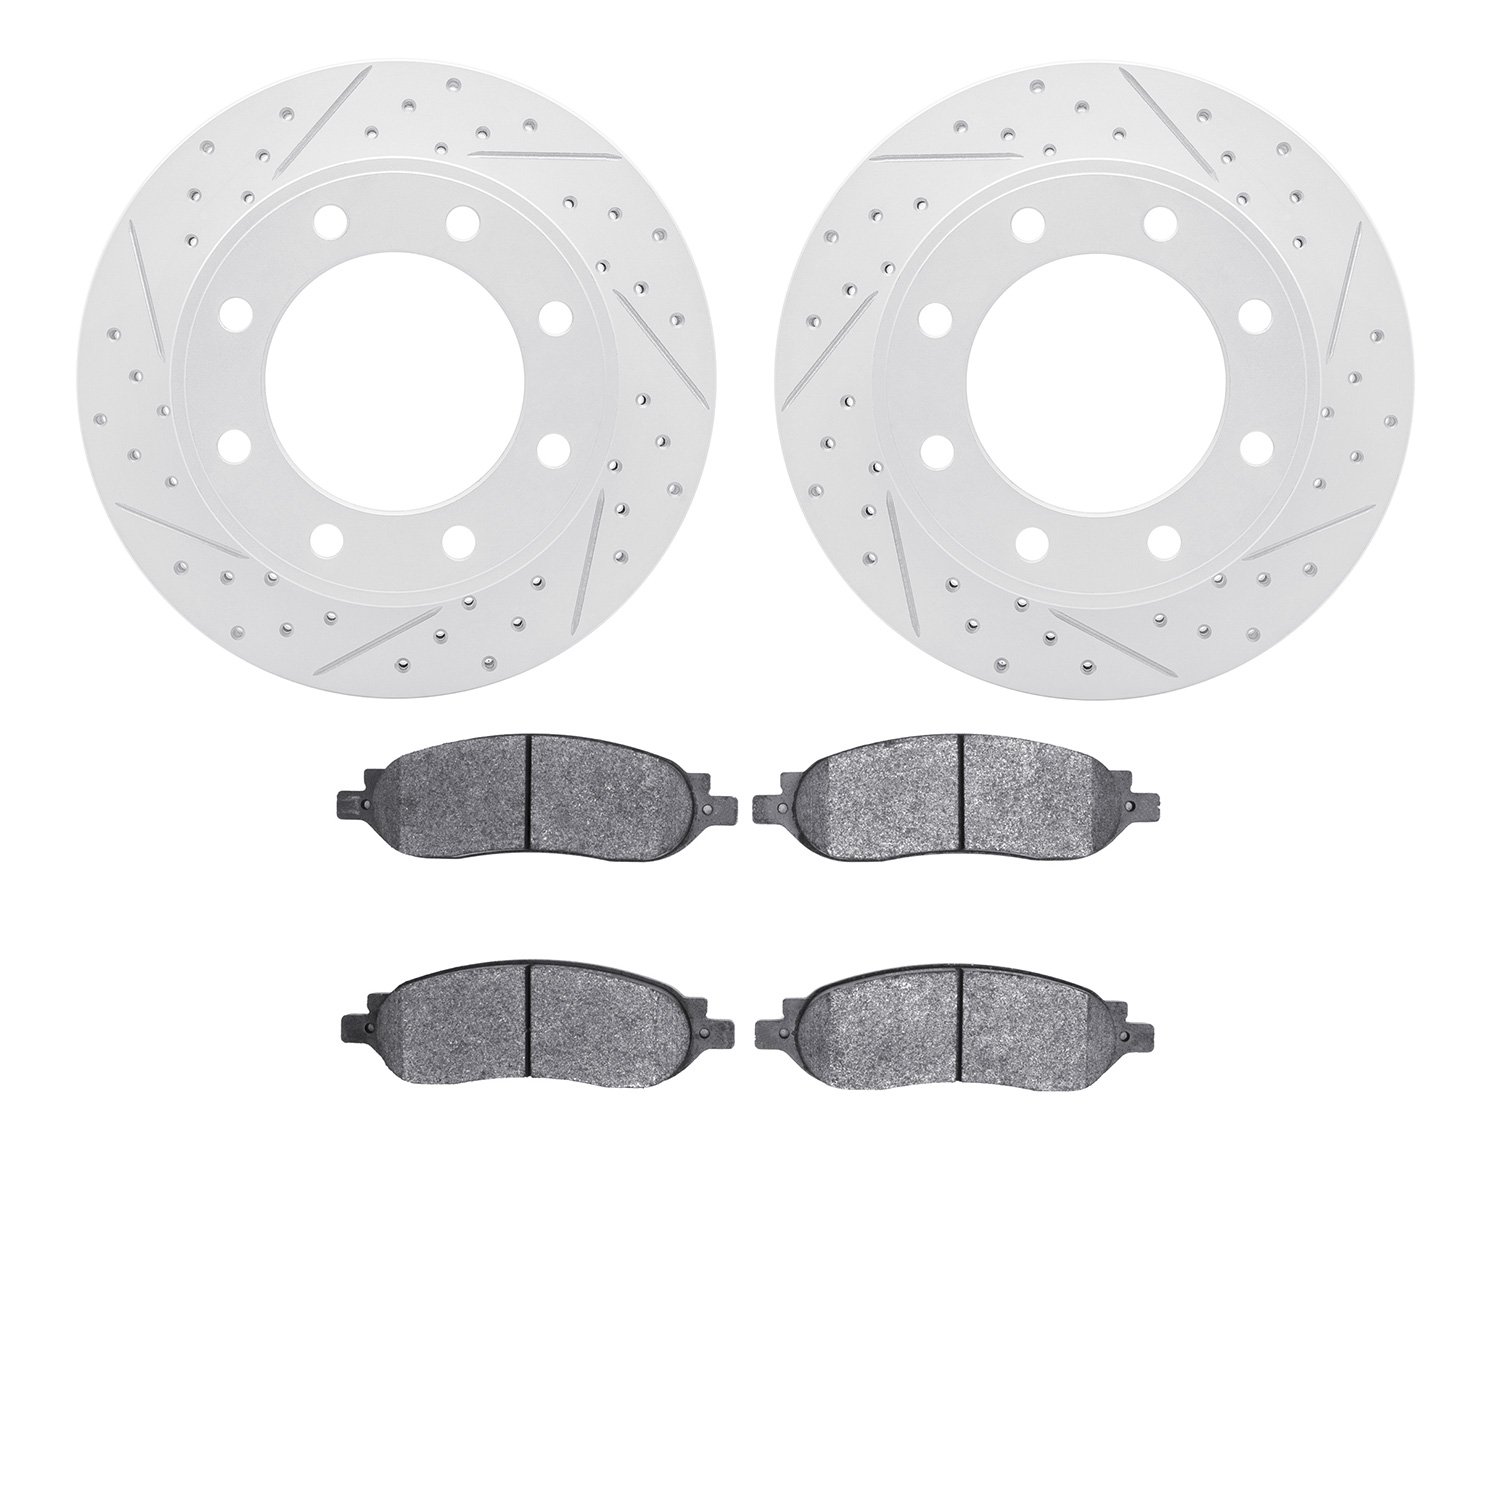 2402-54056 Geoperformance Drilled/Slotted Brake Rotors with Ultimate-Duty Brake Pads Kit, 2005-2007 Ford/Lincoln/Mercury/Mazda,